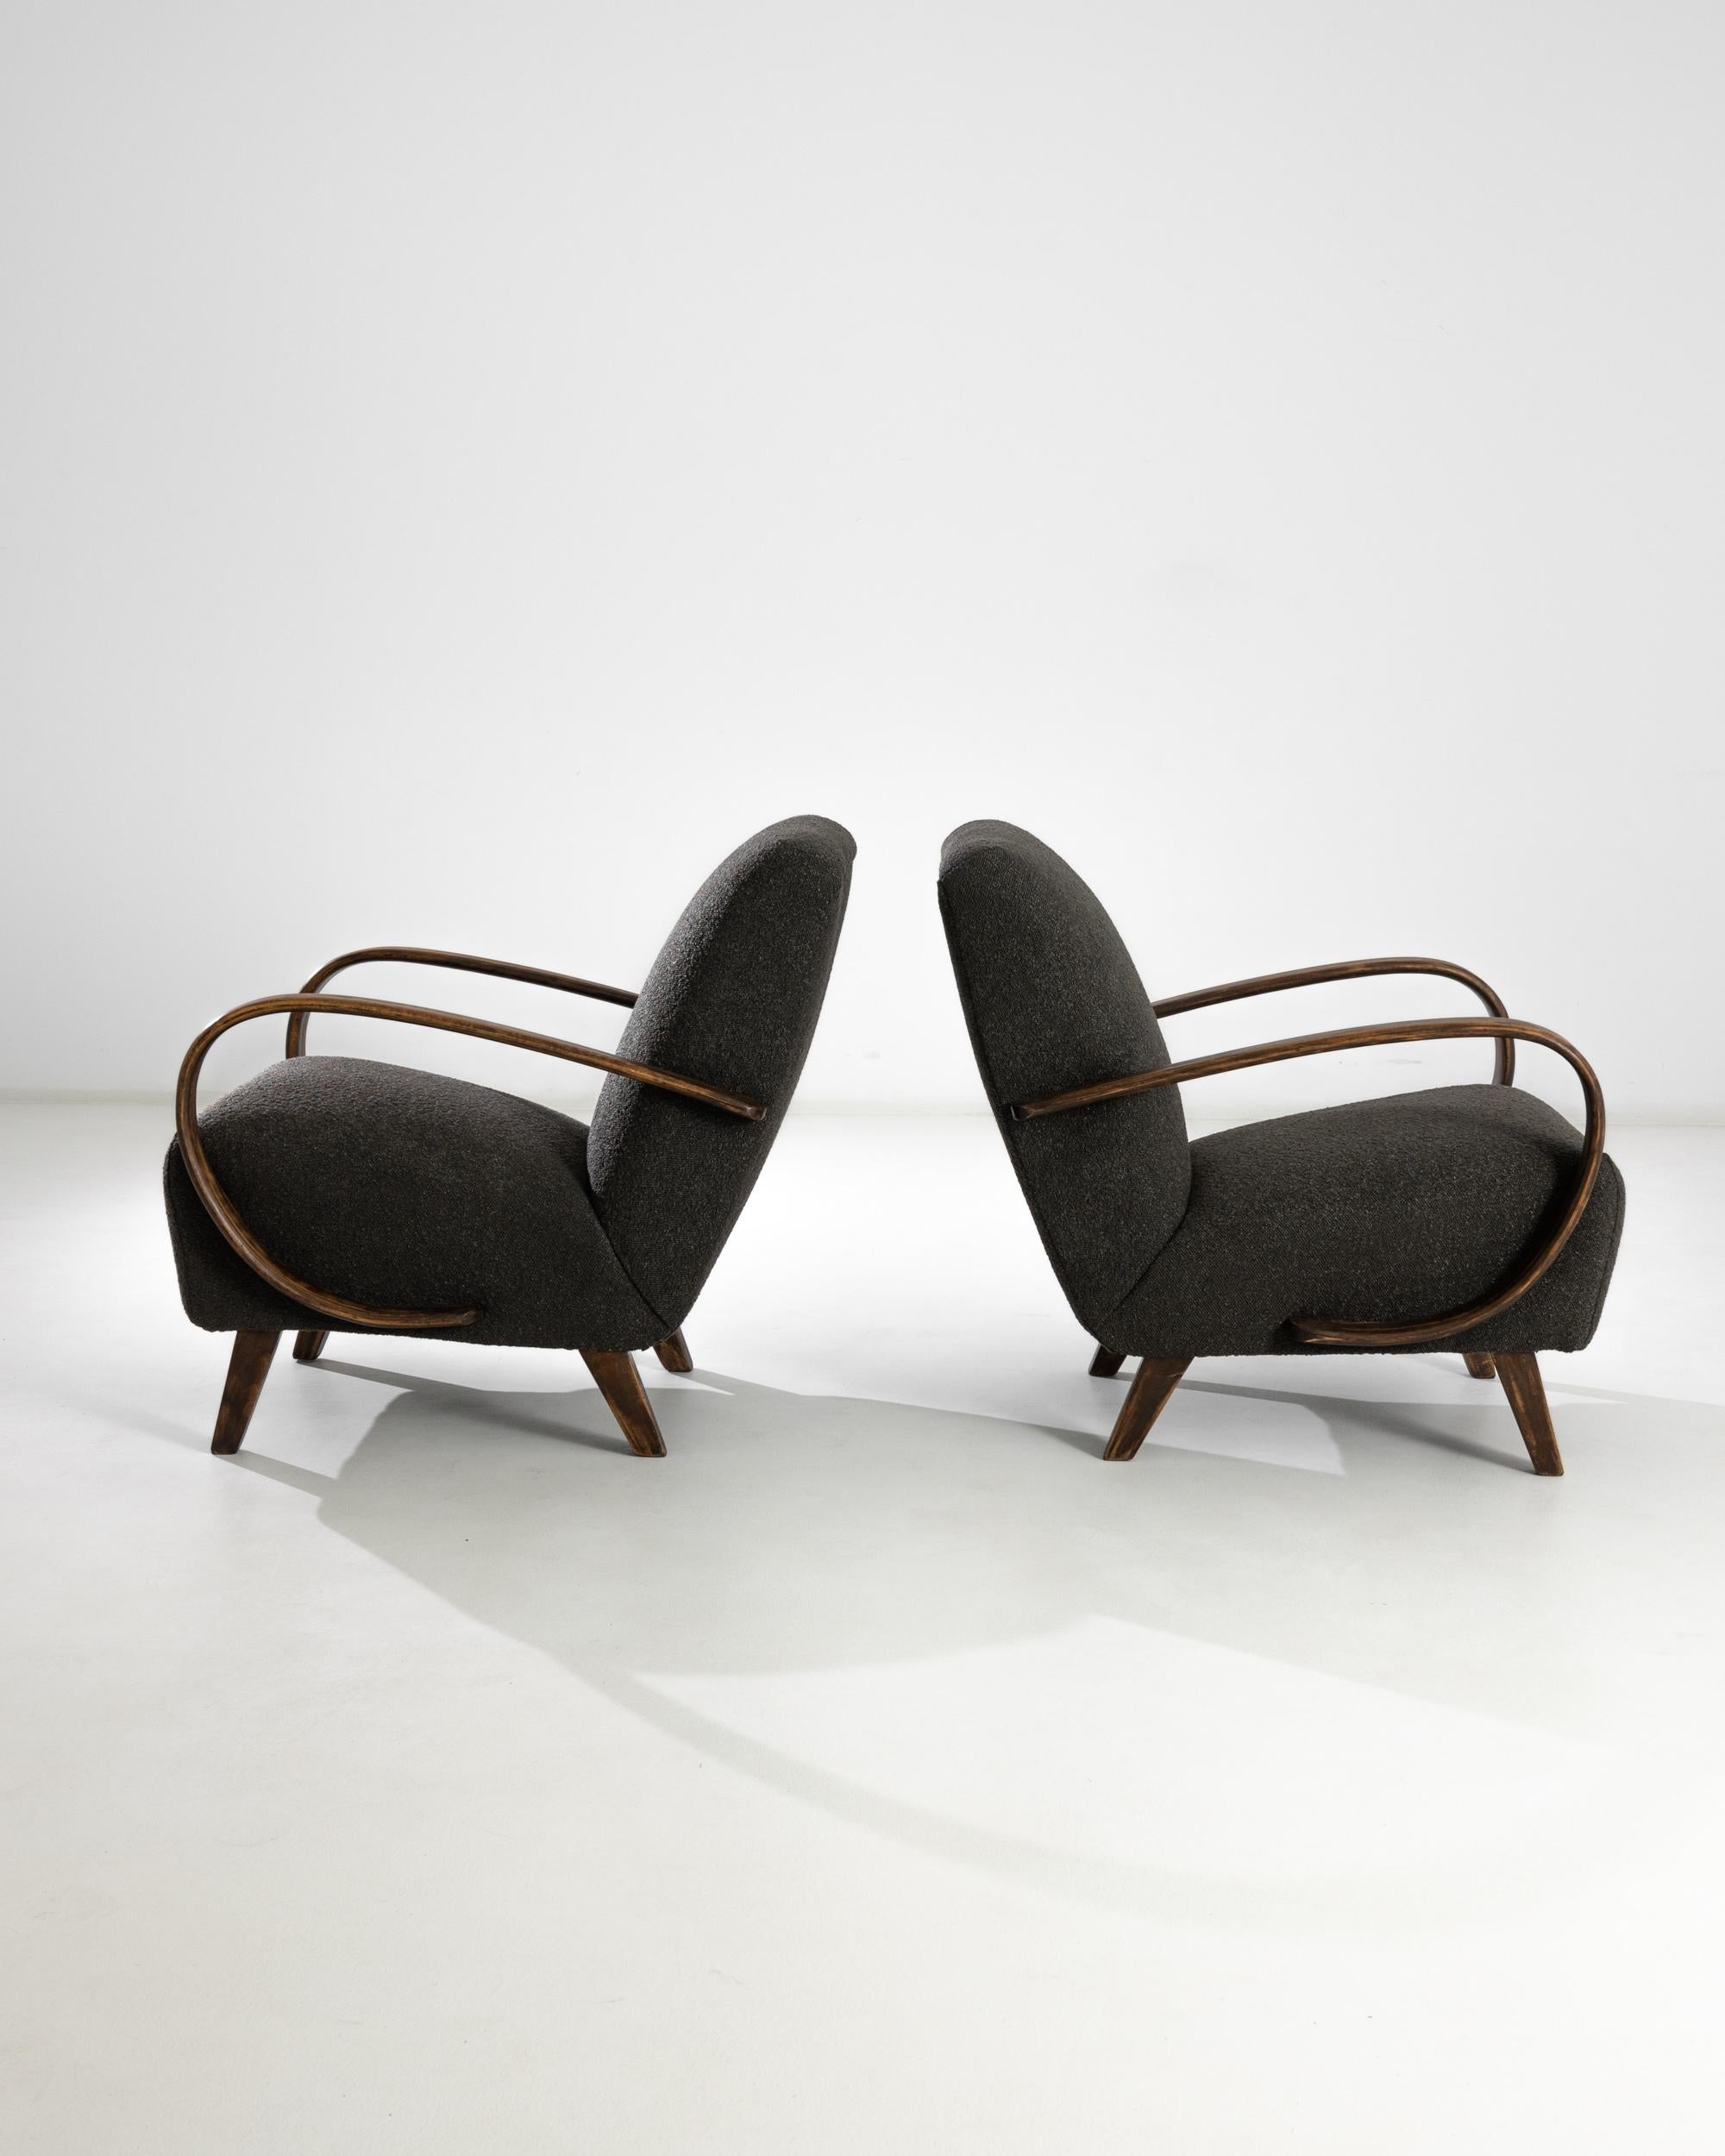 A design originally conceived in the 1930s by iconic Czech industrial designer J. Halabala, this vintage pair was realized circa 1950. A pair of swooping bentwood armrests frame a generous cushioned seat, upholstered in charcoal grey boucle. The